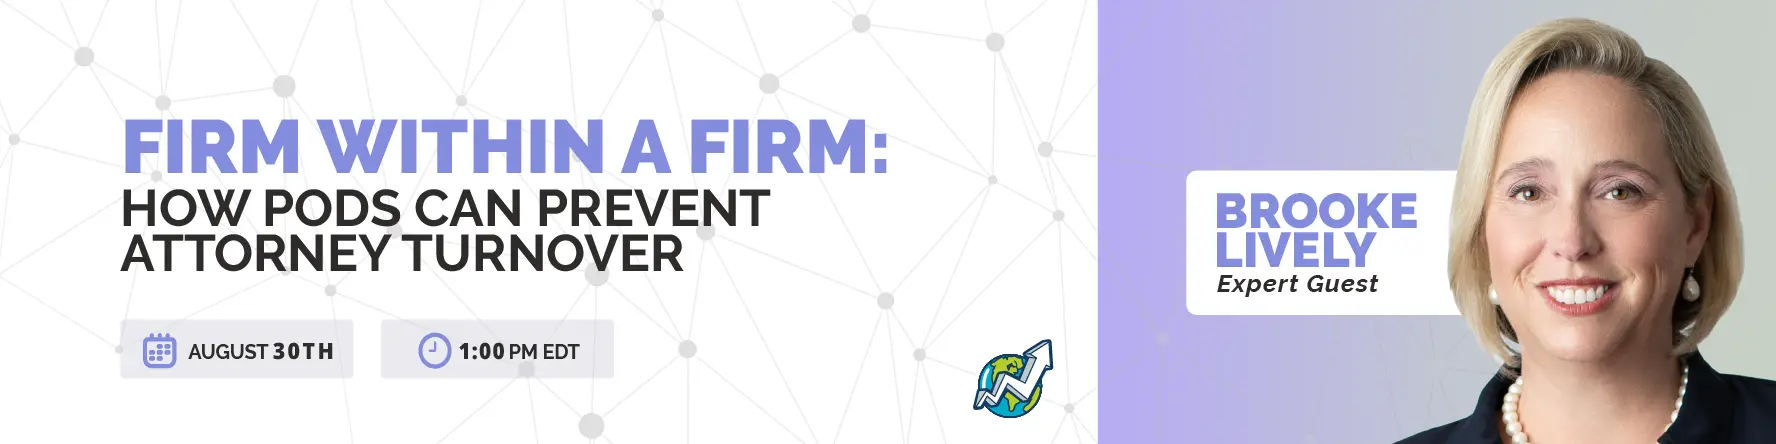 Firm Within A Firm: How Pods Can Prevent Attorney Turnover Webinar Banner